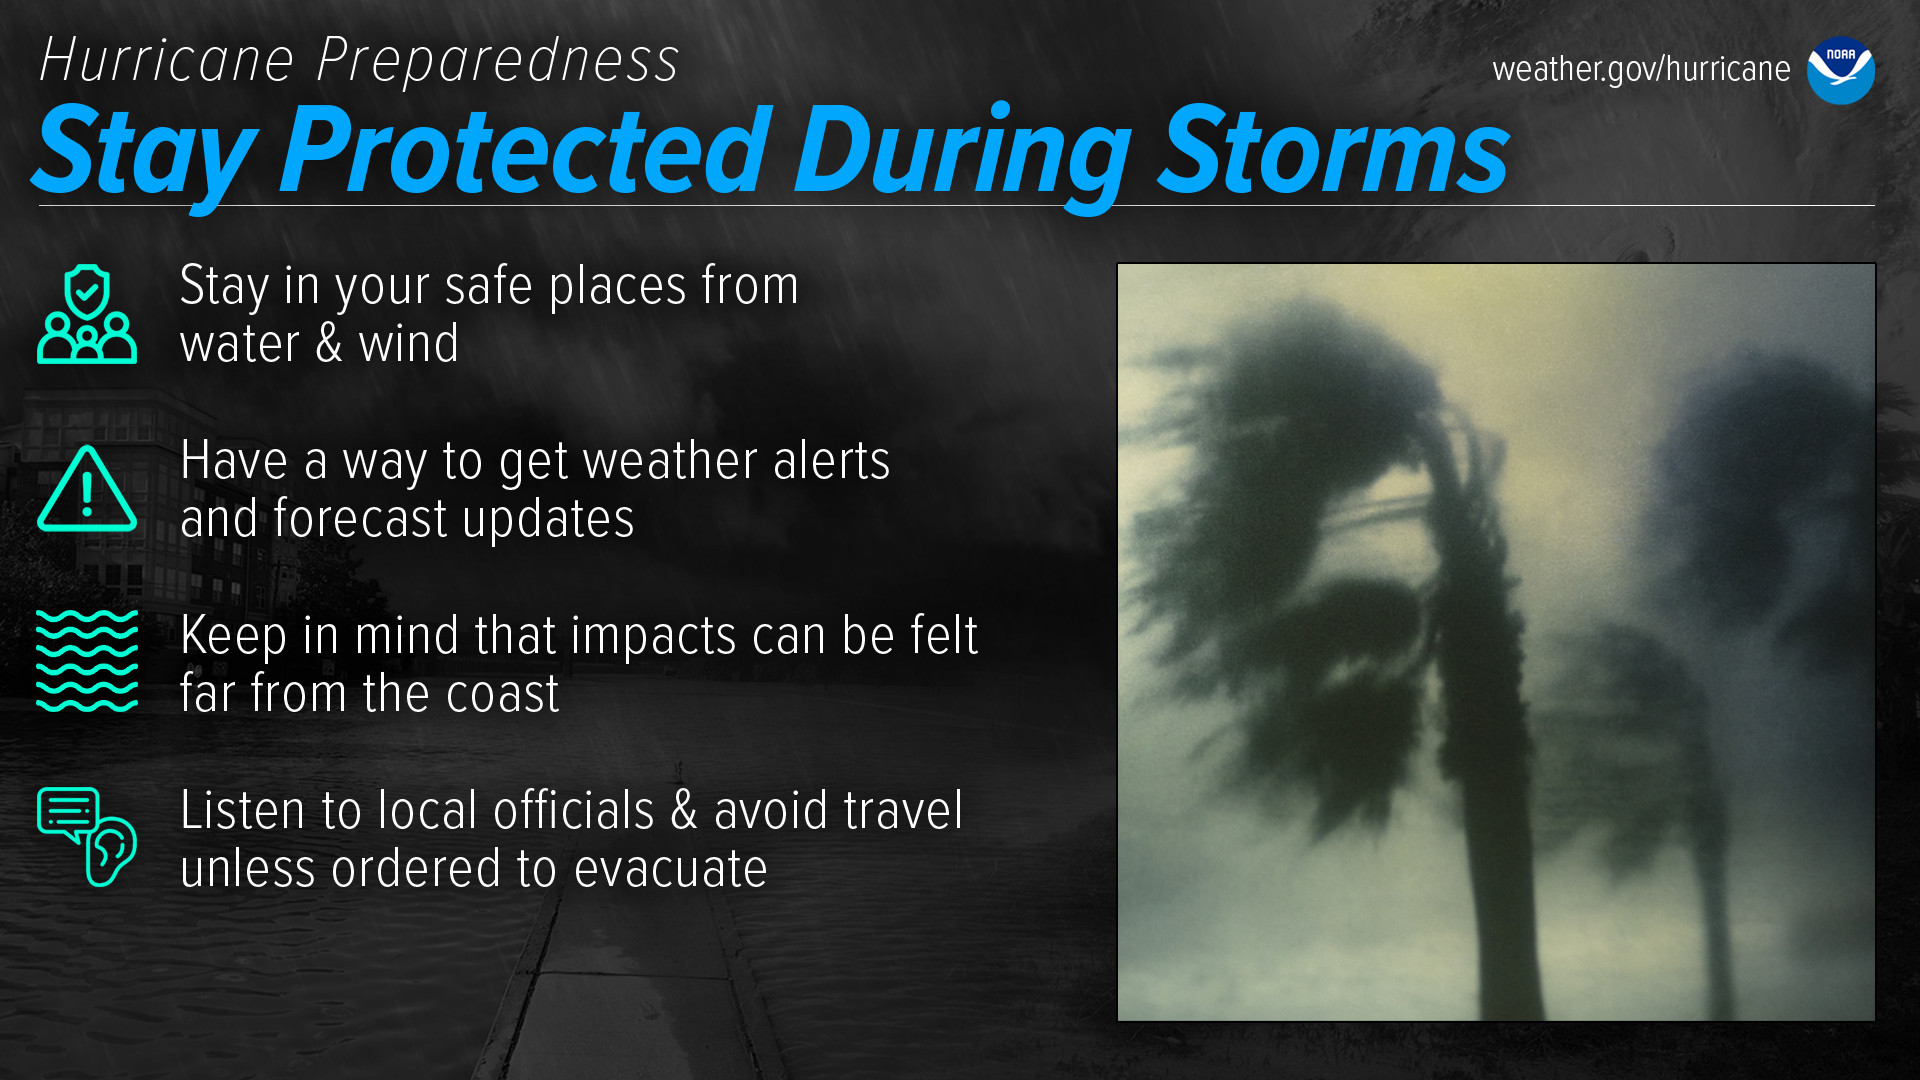 Hurricane Preparedness - Stay Protected During Storms. Stay in your safe places from water and wind. Have a way to get weather alerts and forecast updates. Keep in mind that impacts can be felt far from the coast. Listen to local officials and avoid travel unless ordered to evacuate.